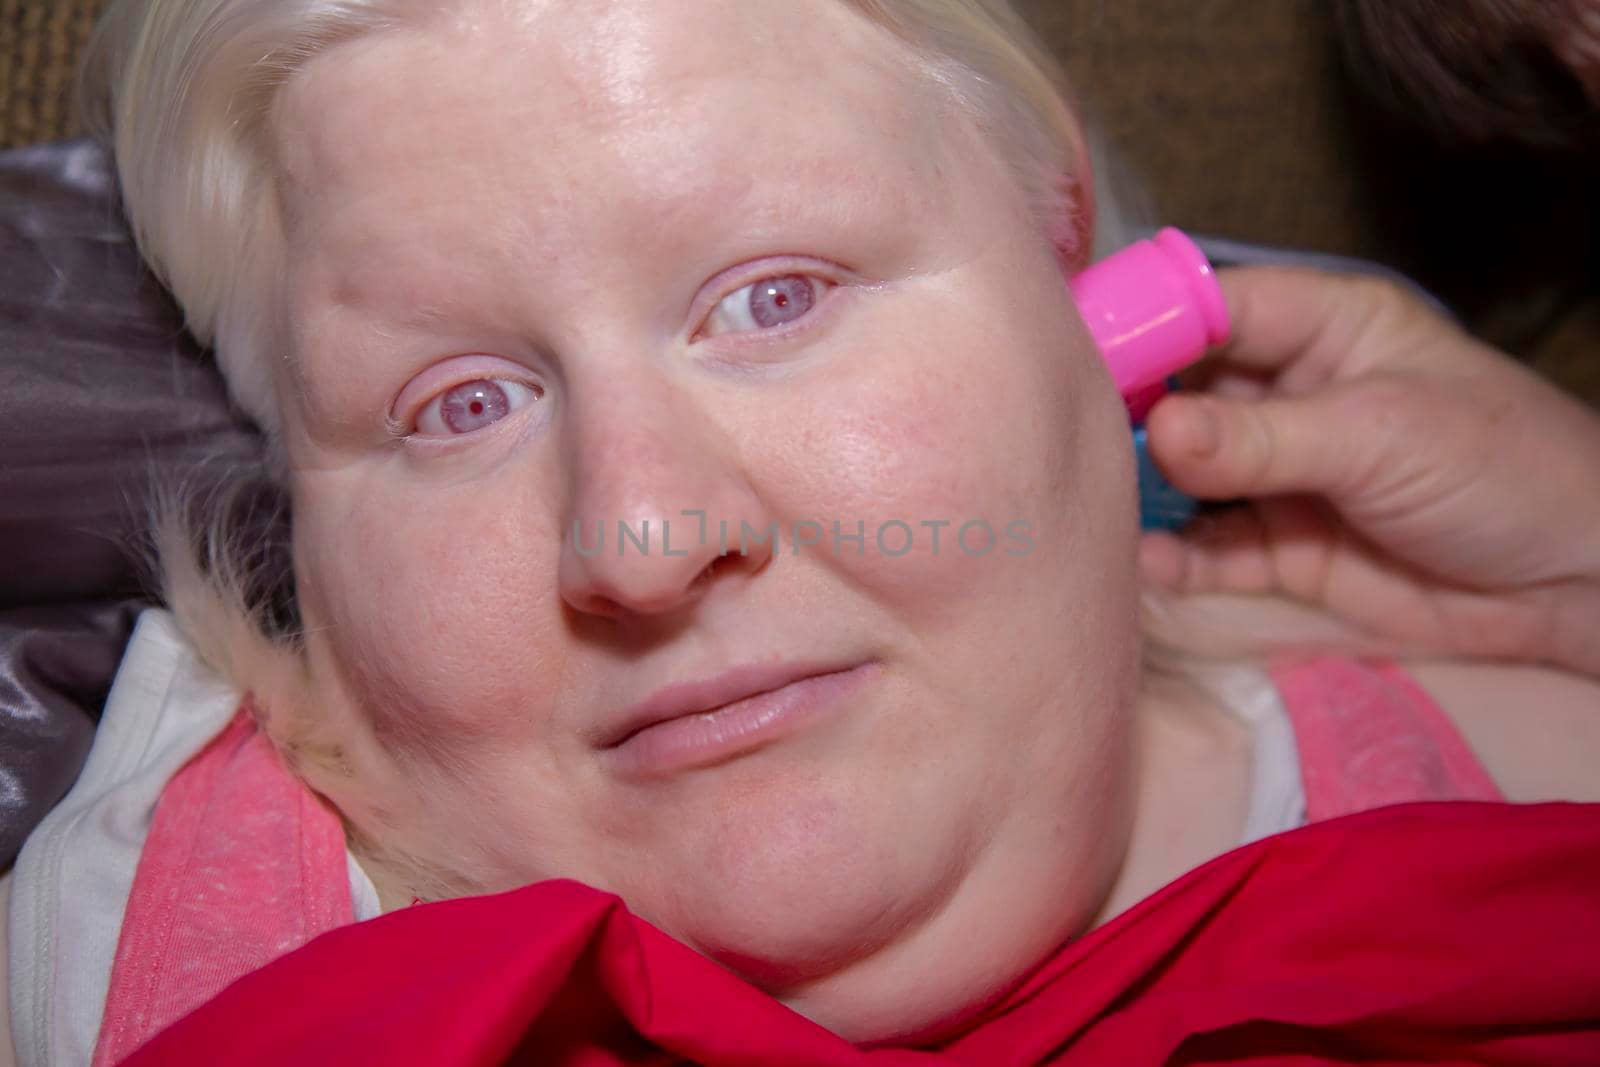 Someone checking an albino woman's ear with a toy